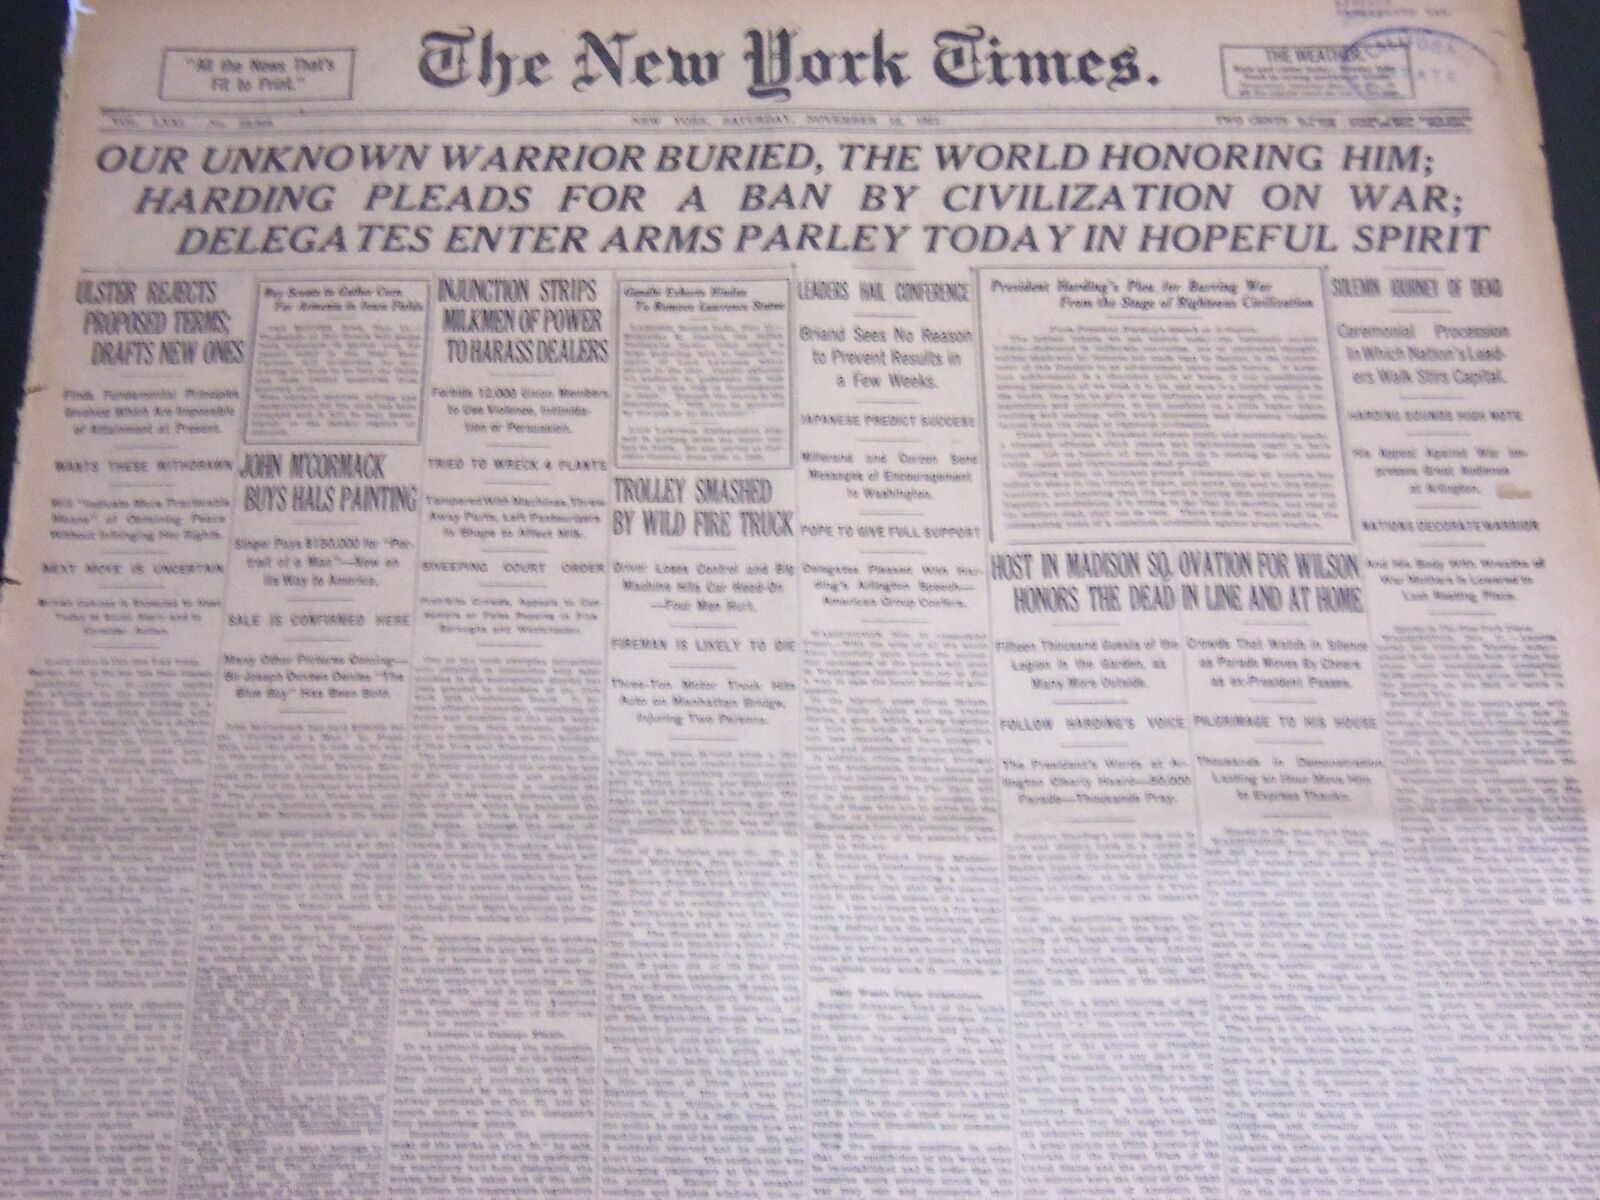 1921 NOVEMBER 12 NEW YORK TIMES - OUR UNKNOWN WARRIOR BURIED, THE WORLD- NT 6955